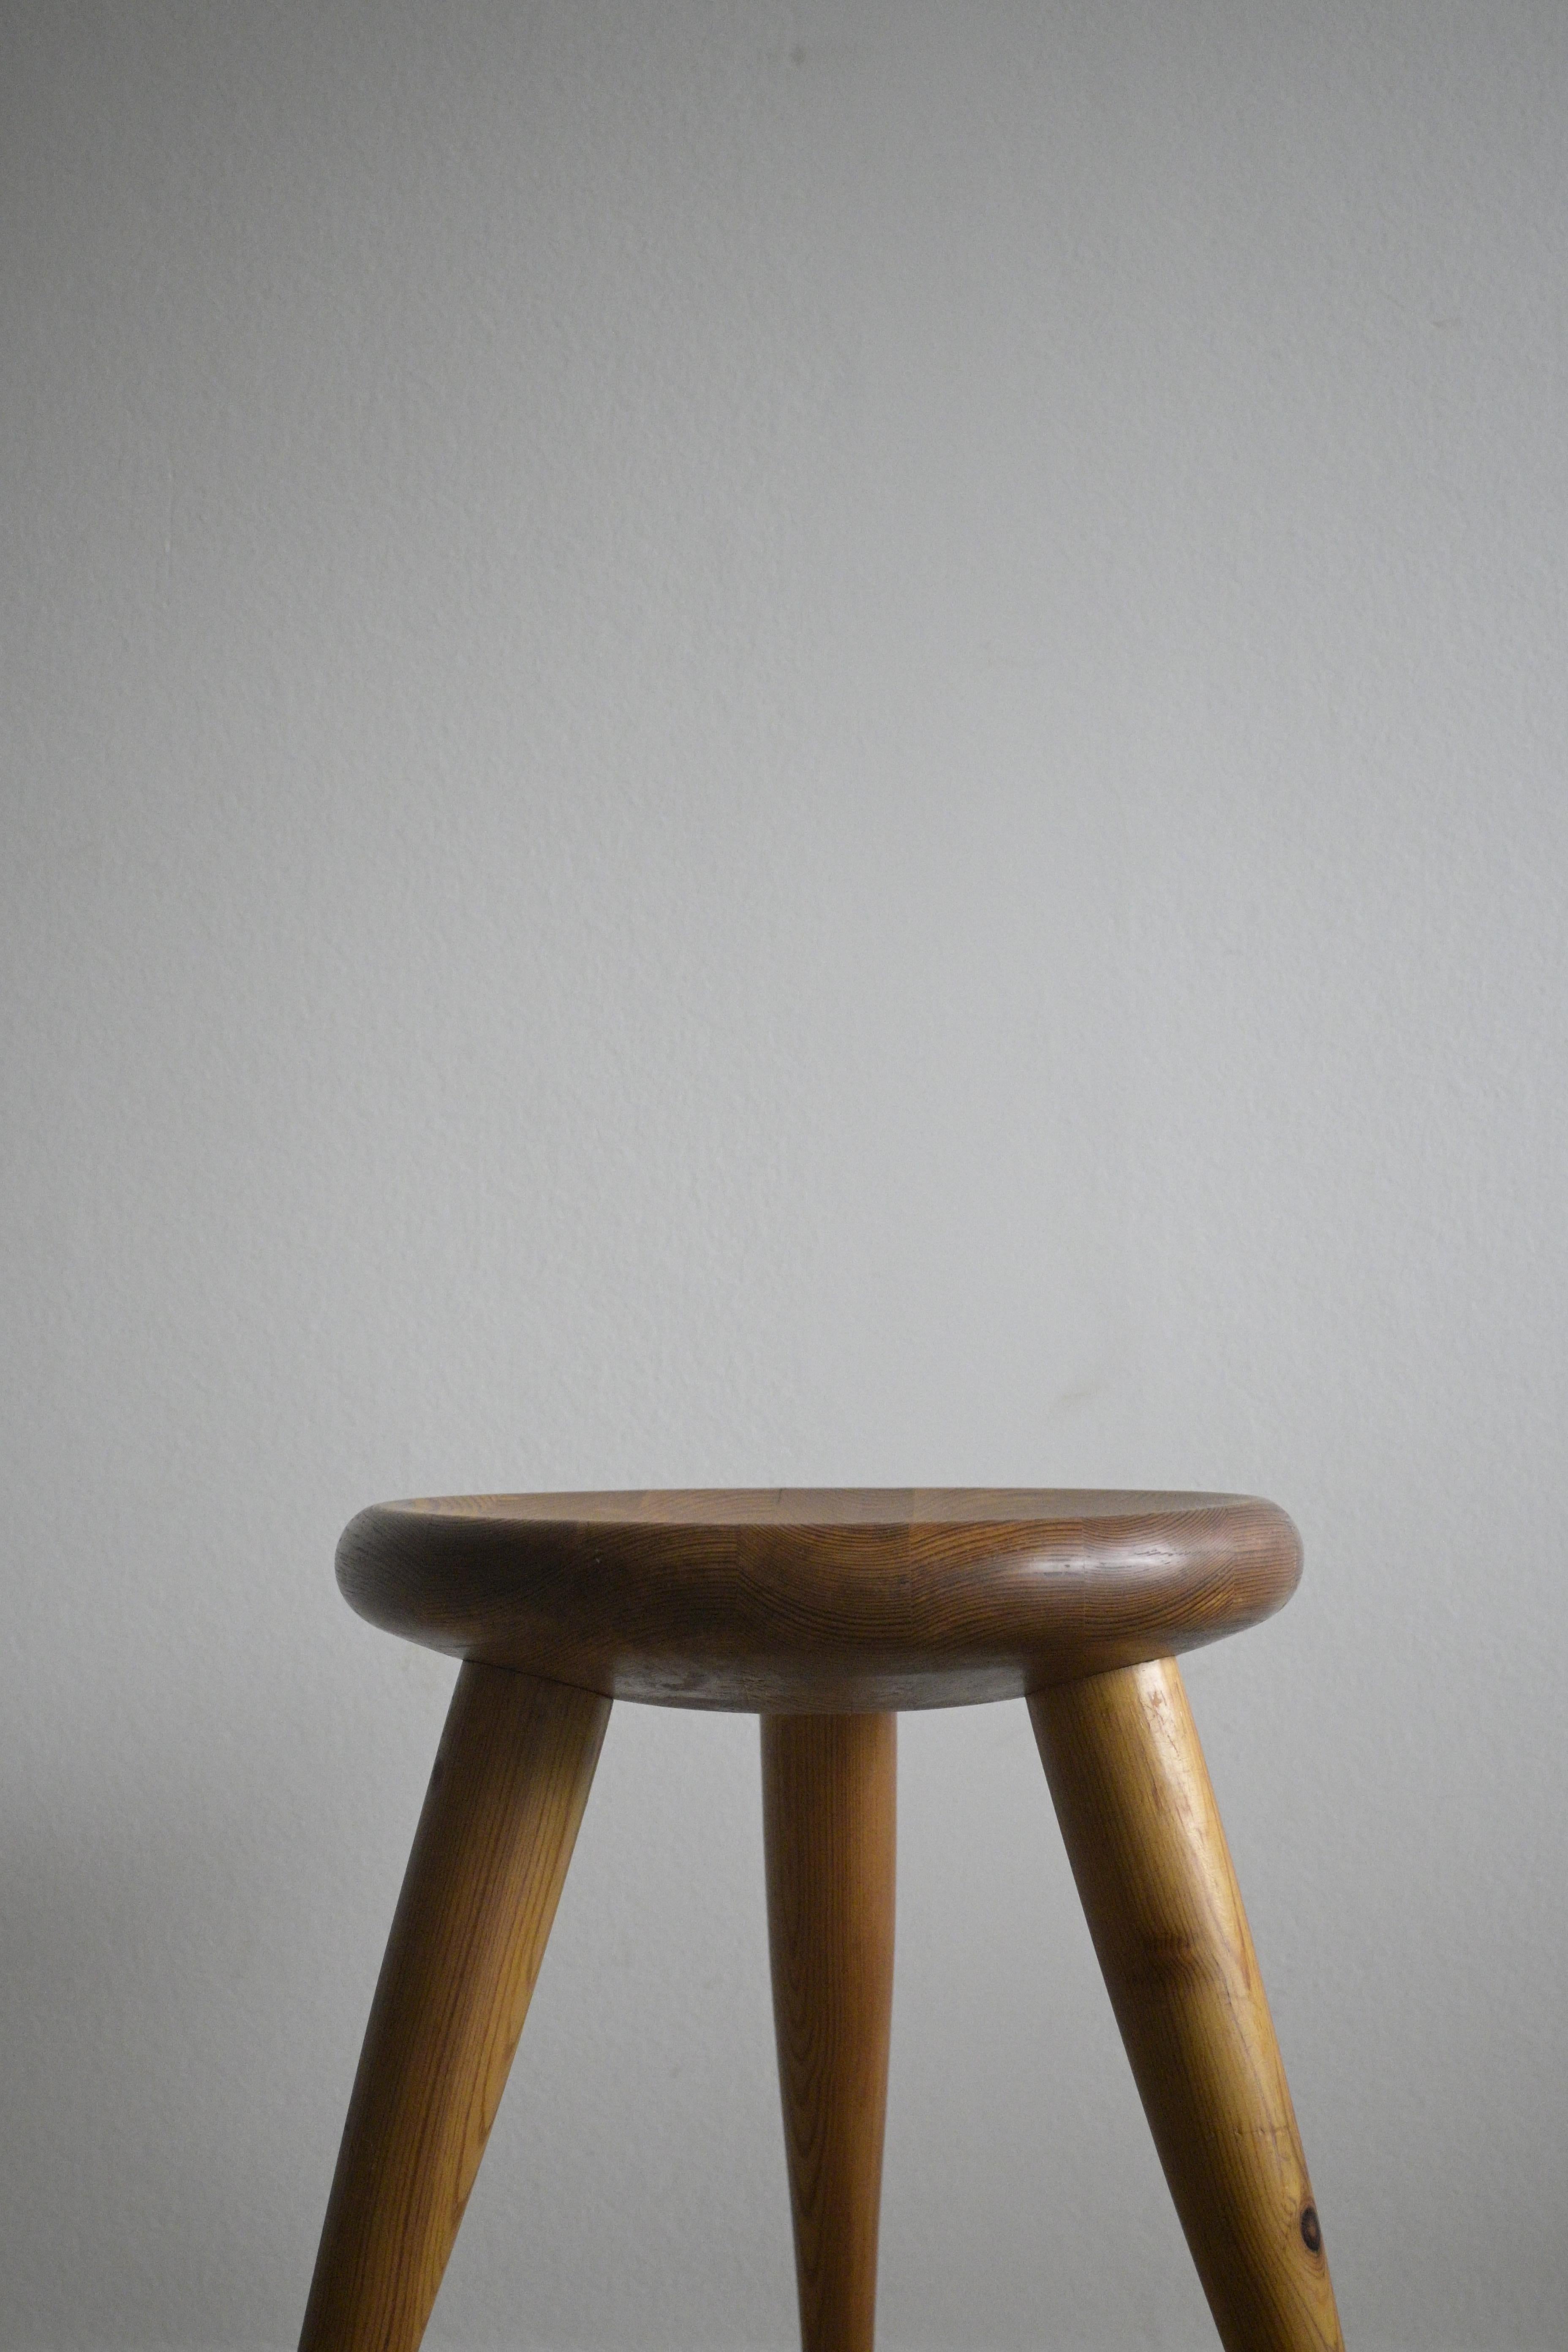 Hand-Crafted Pine Stool produced by Möbelkompaniet Ahl & Wahlén, Sweden, 1960